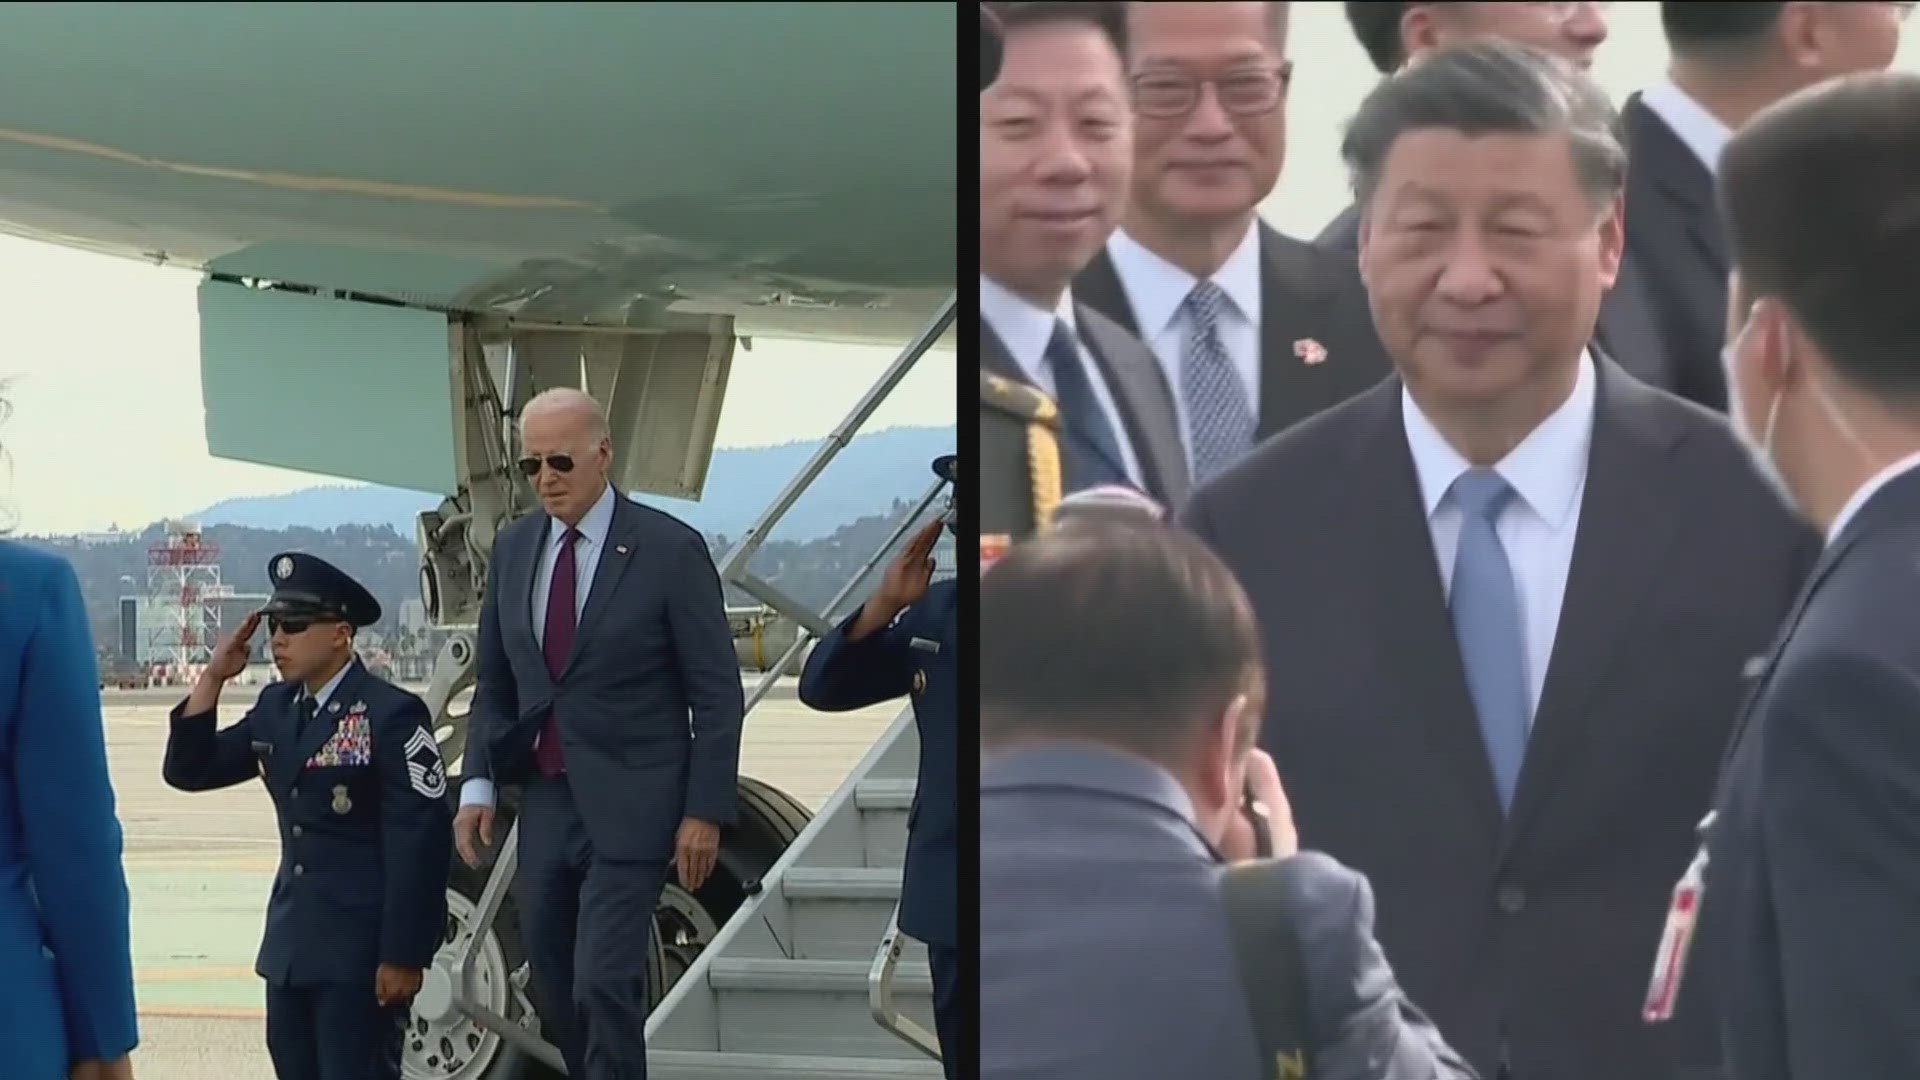 Today President Biden will hold a high-stakes meeting with his Chinese President Xi Jinping.